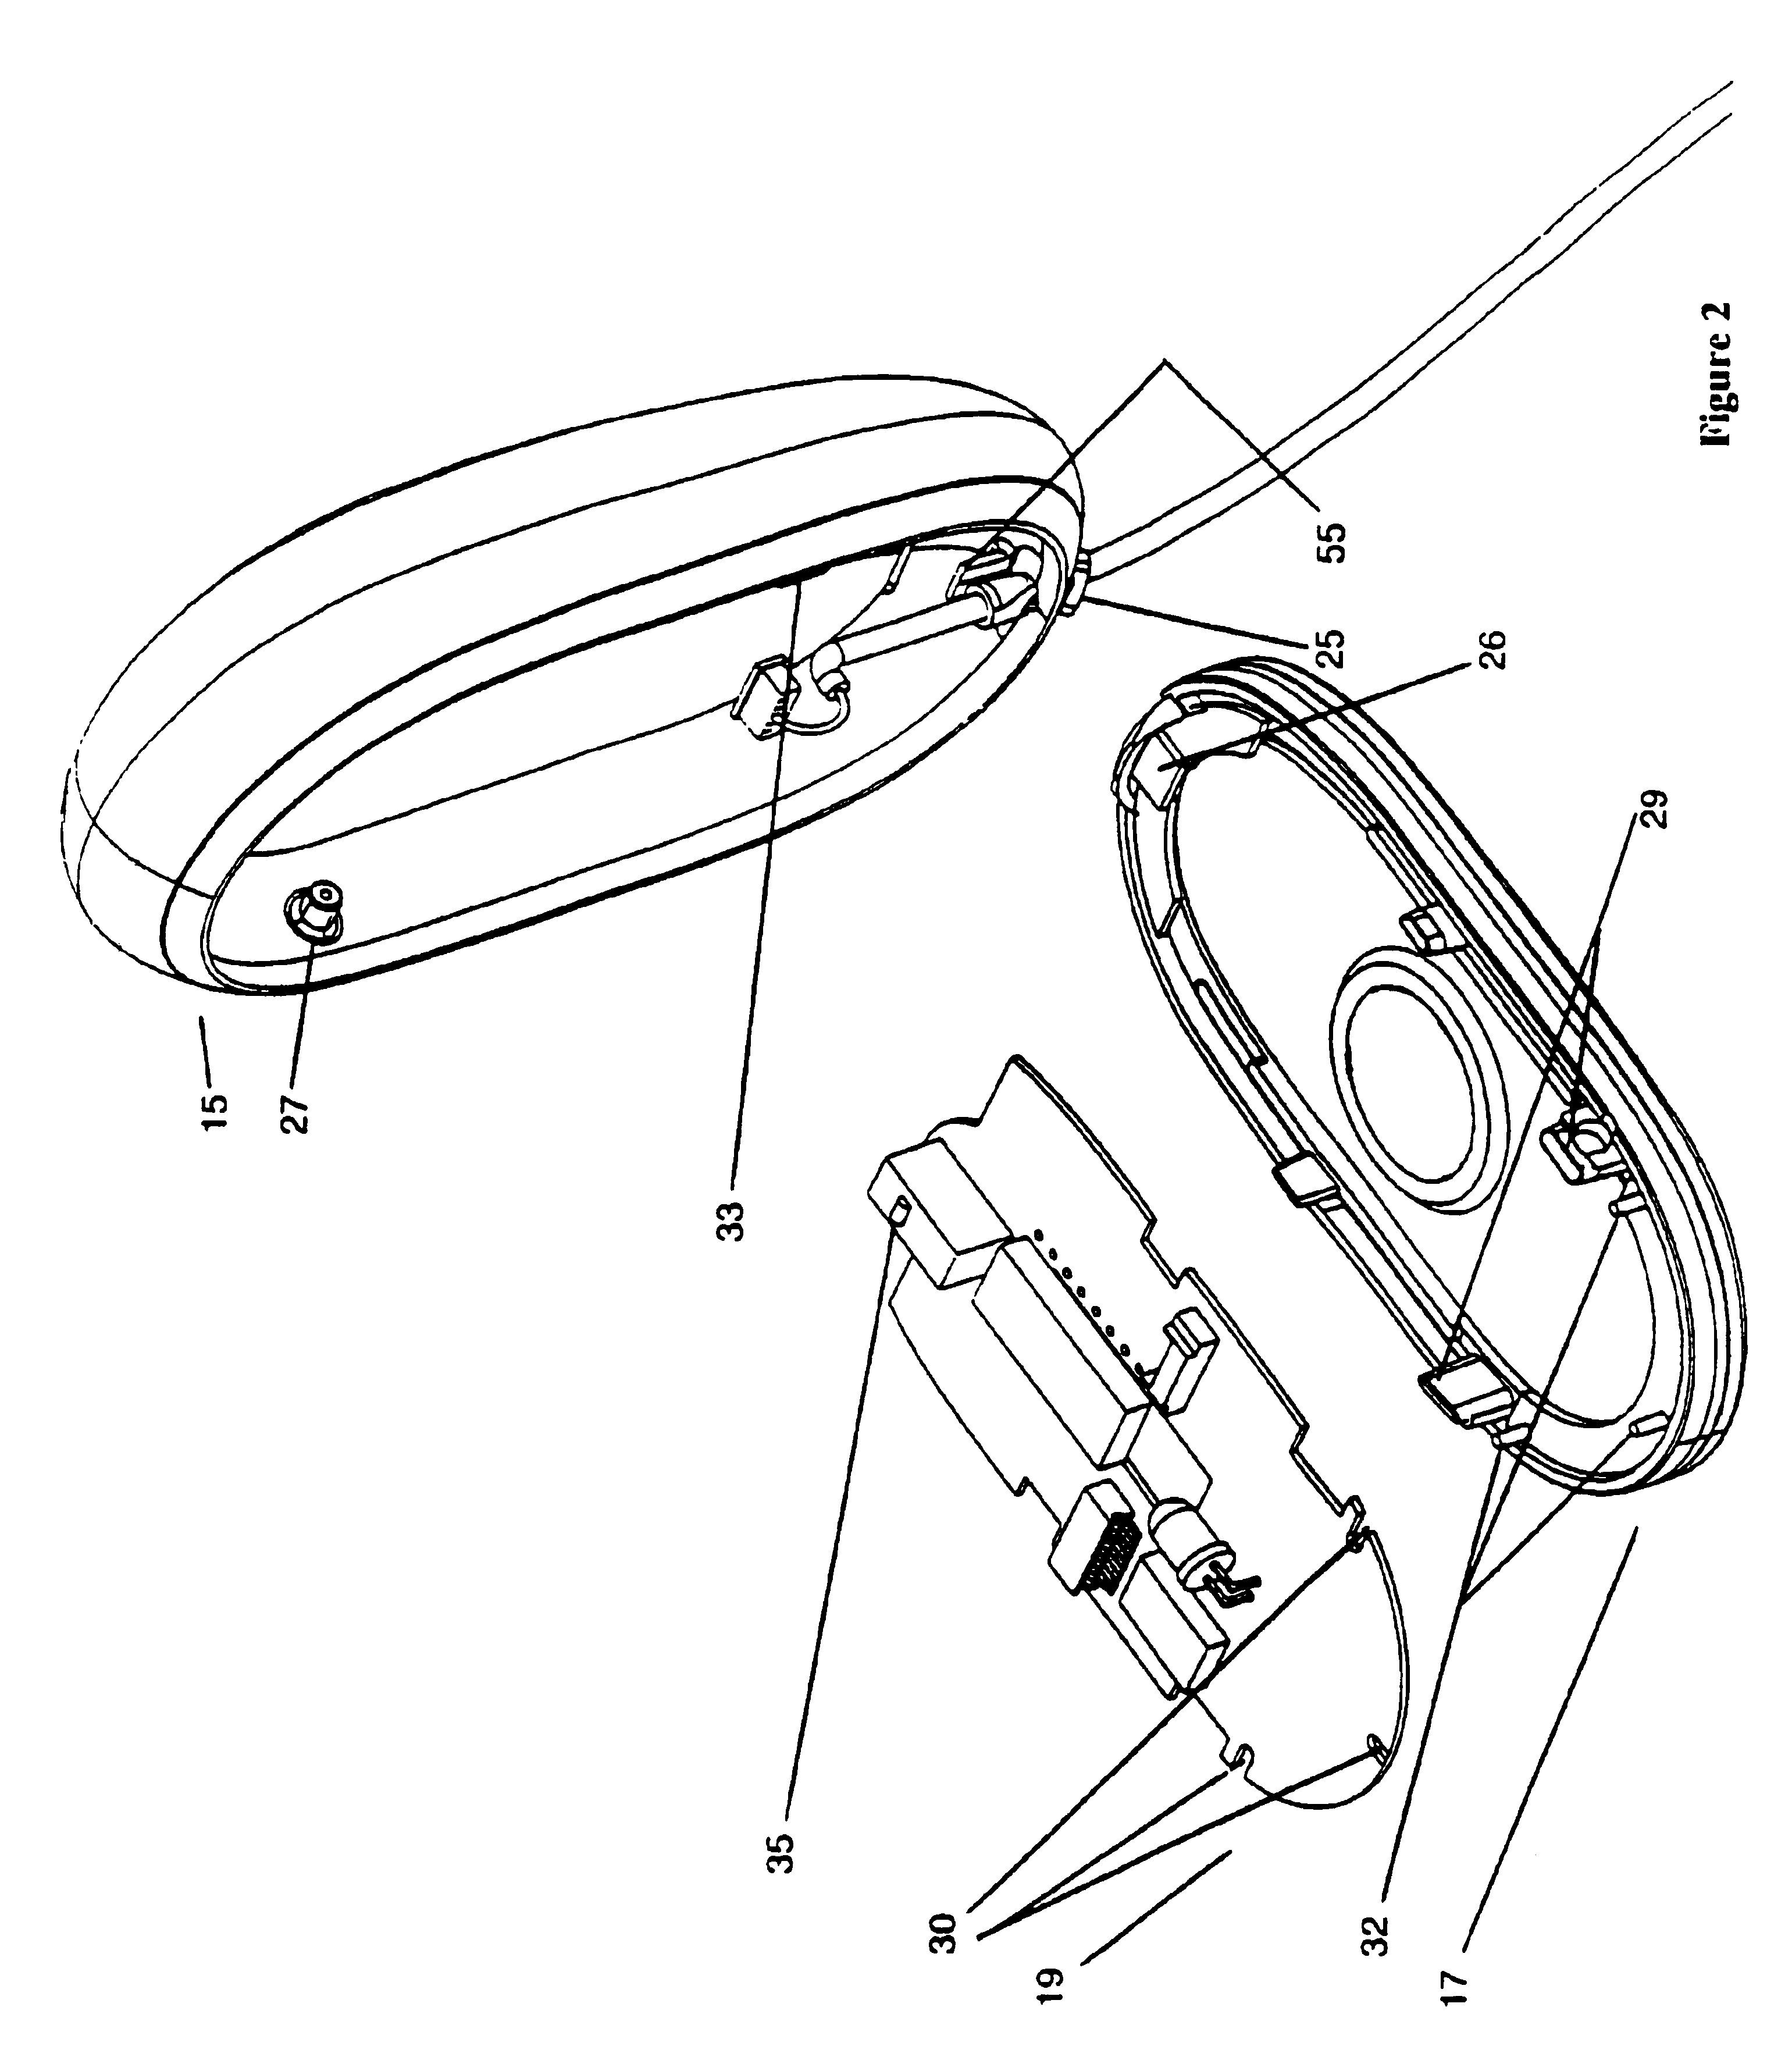 Computer mouse having side areas to maintain a depressed button position